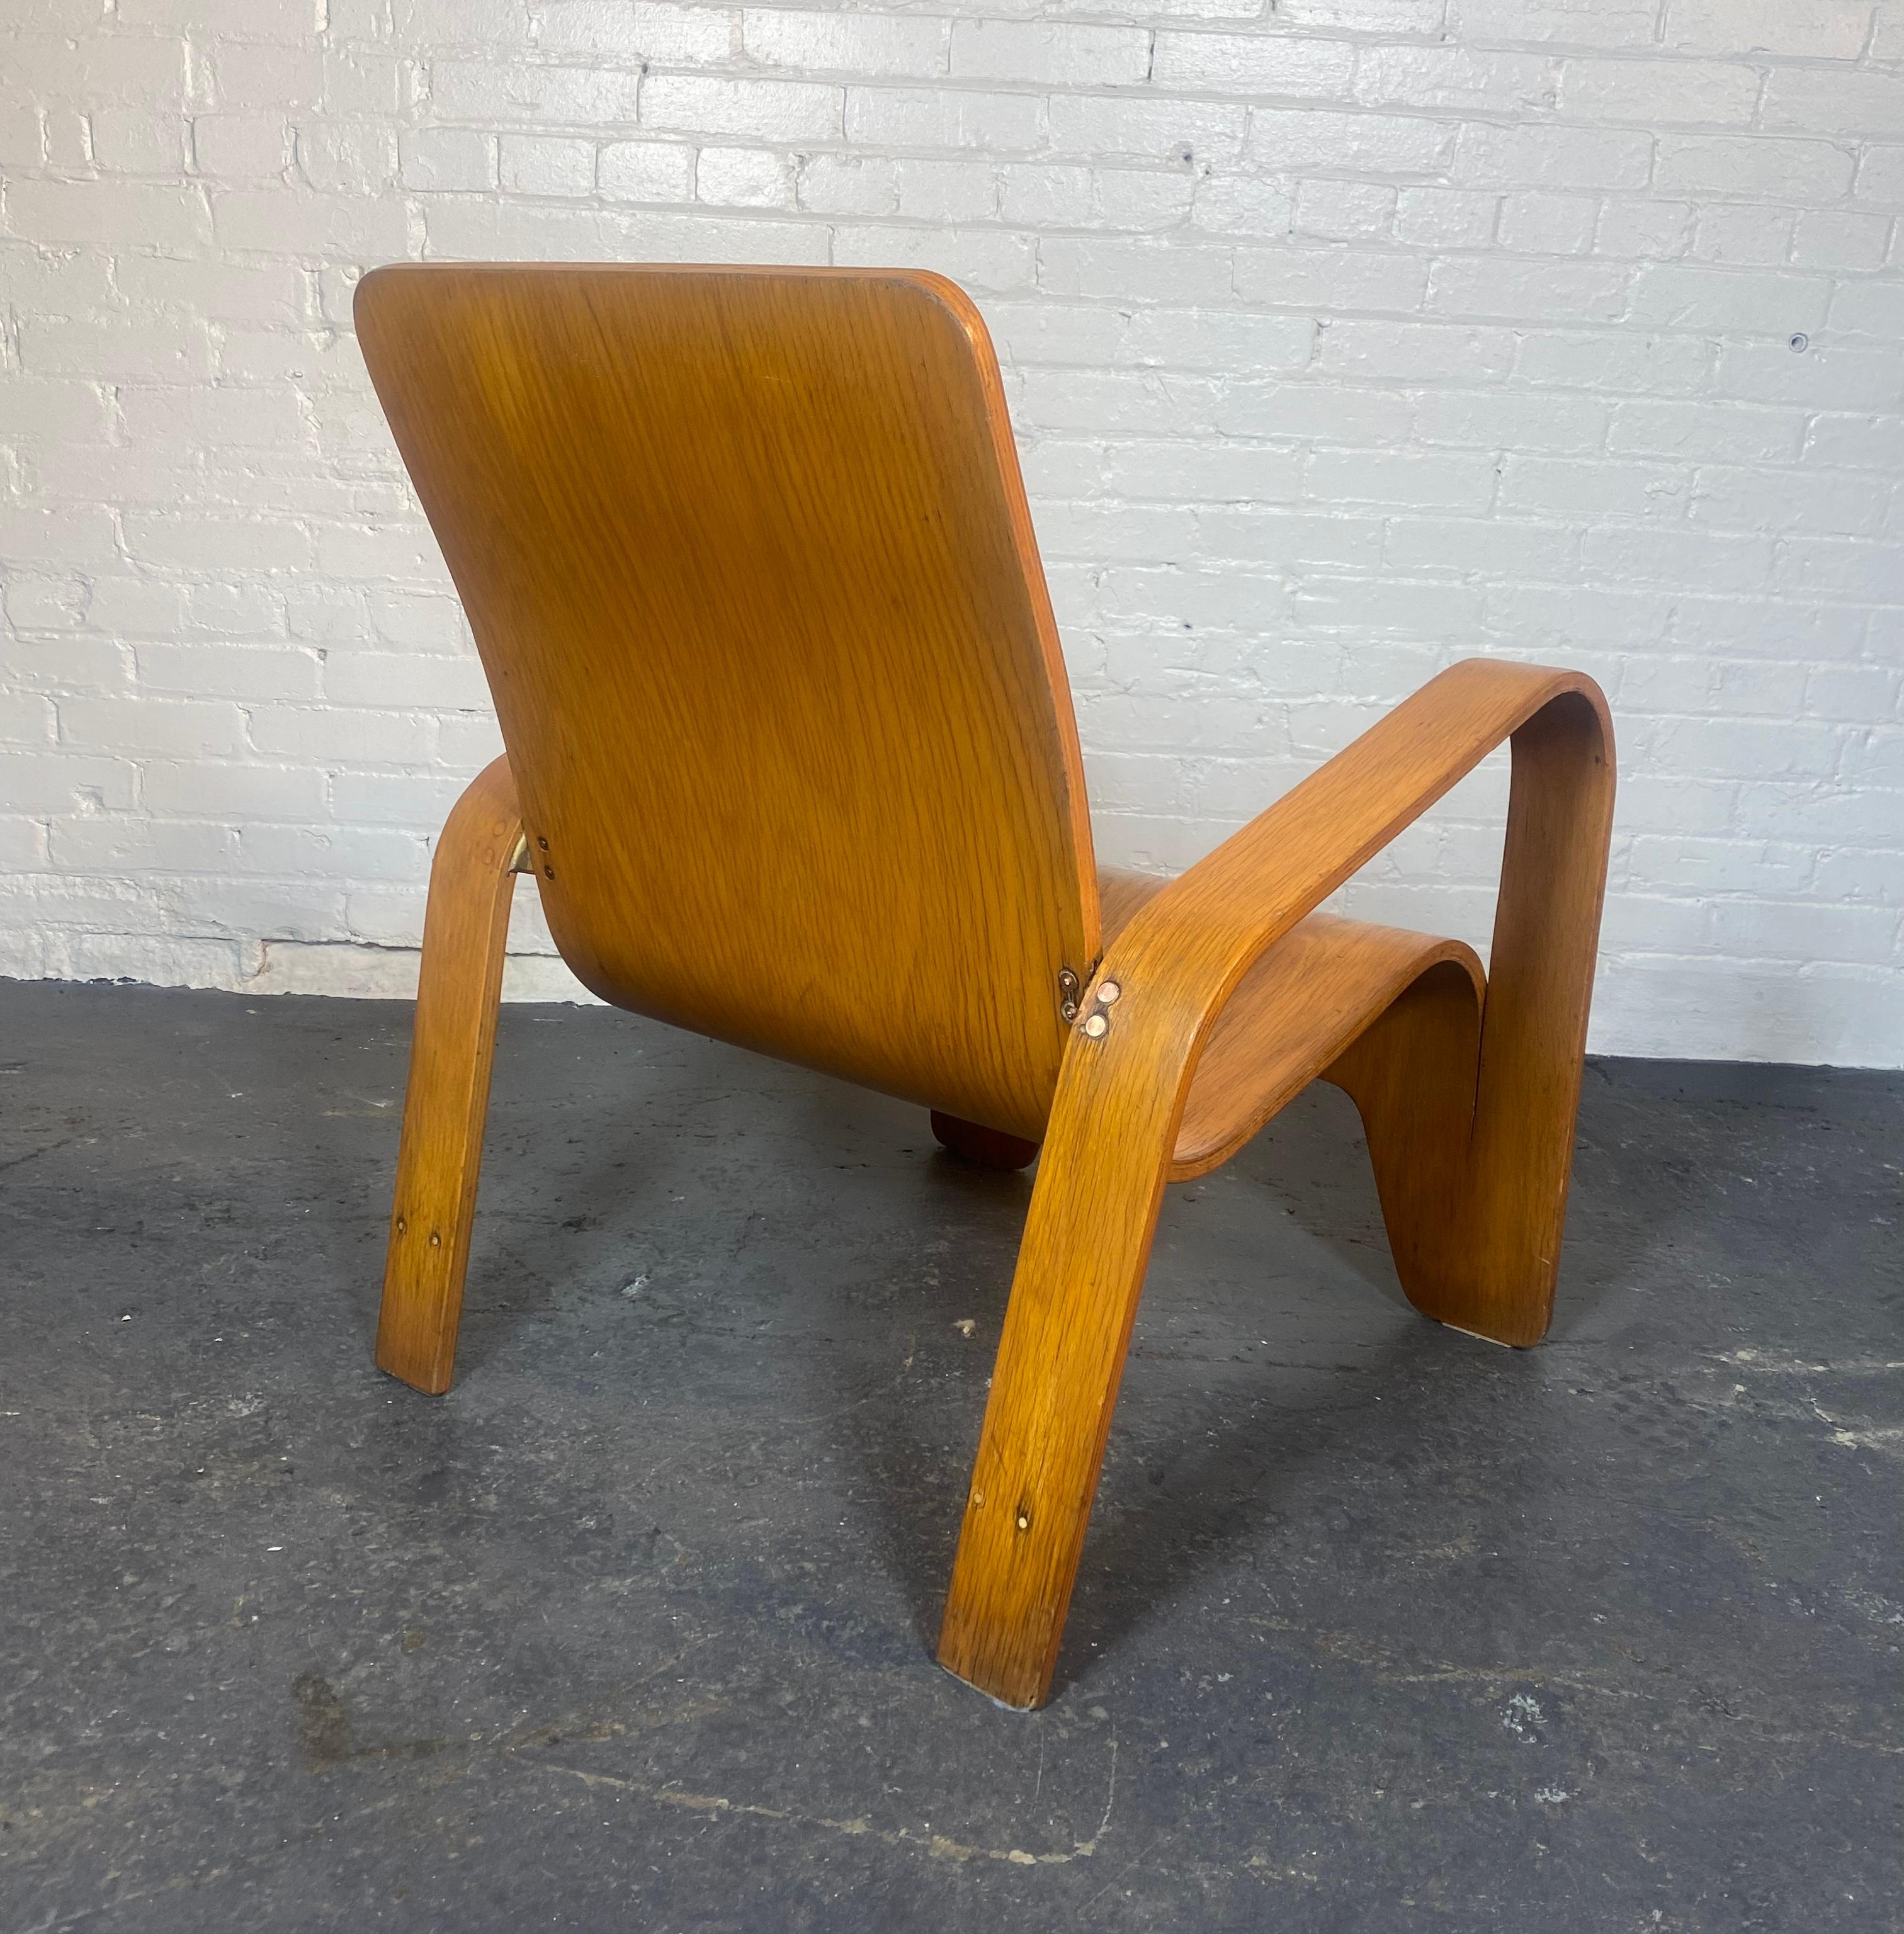 Dutch LaWo1 Molded Plywood Lounge Chair by Han Pieck for Lawo Ommen/ Netherlands 1945 For Sale